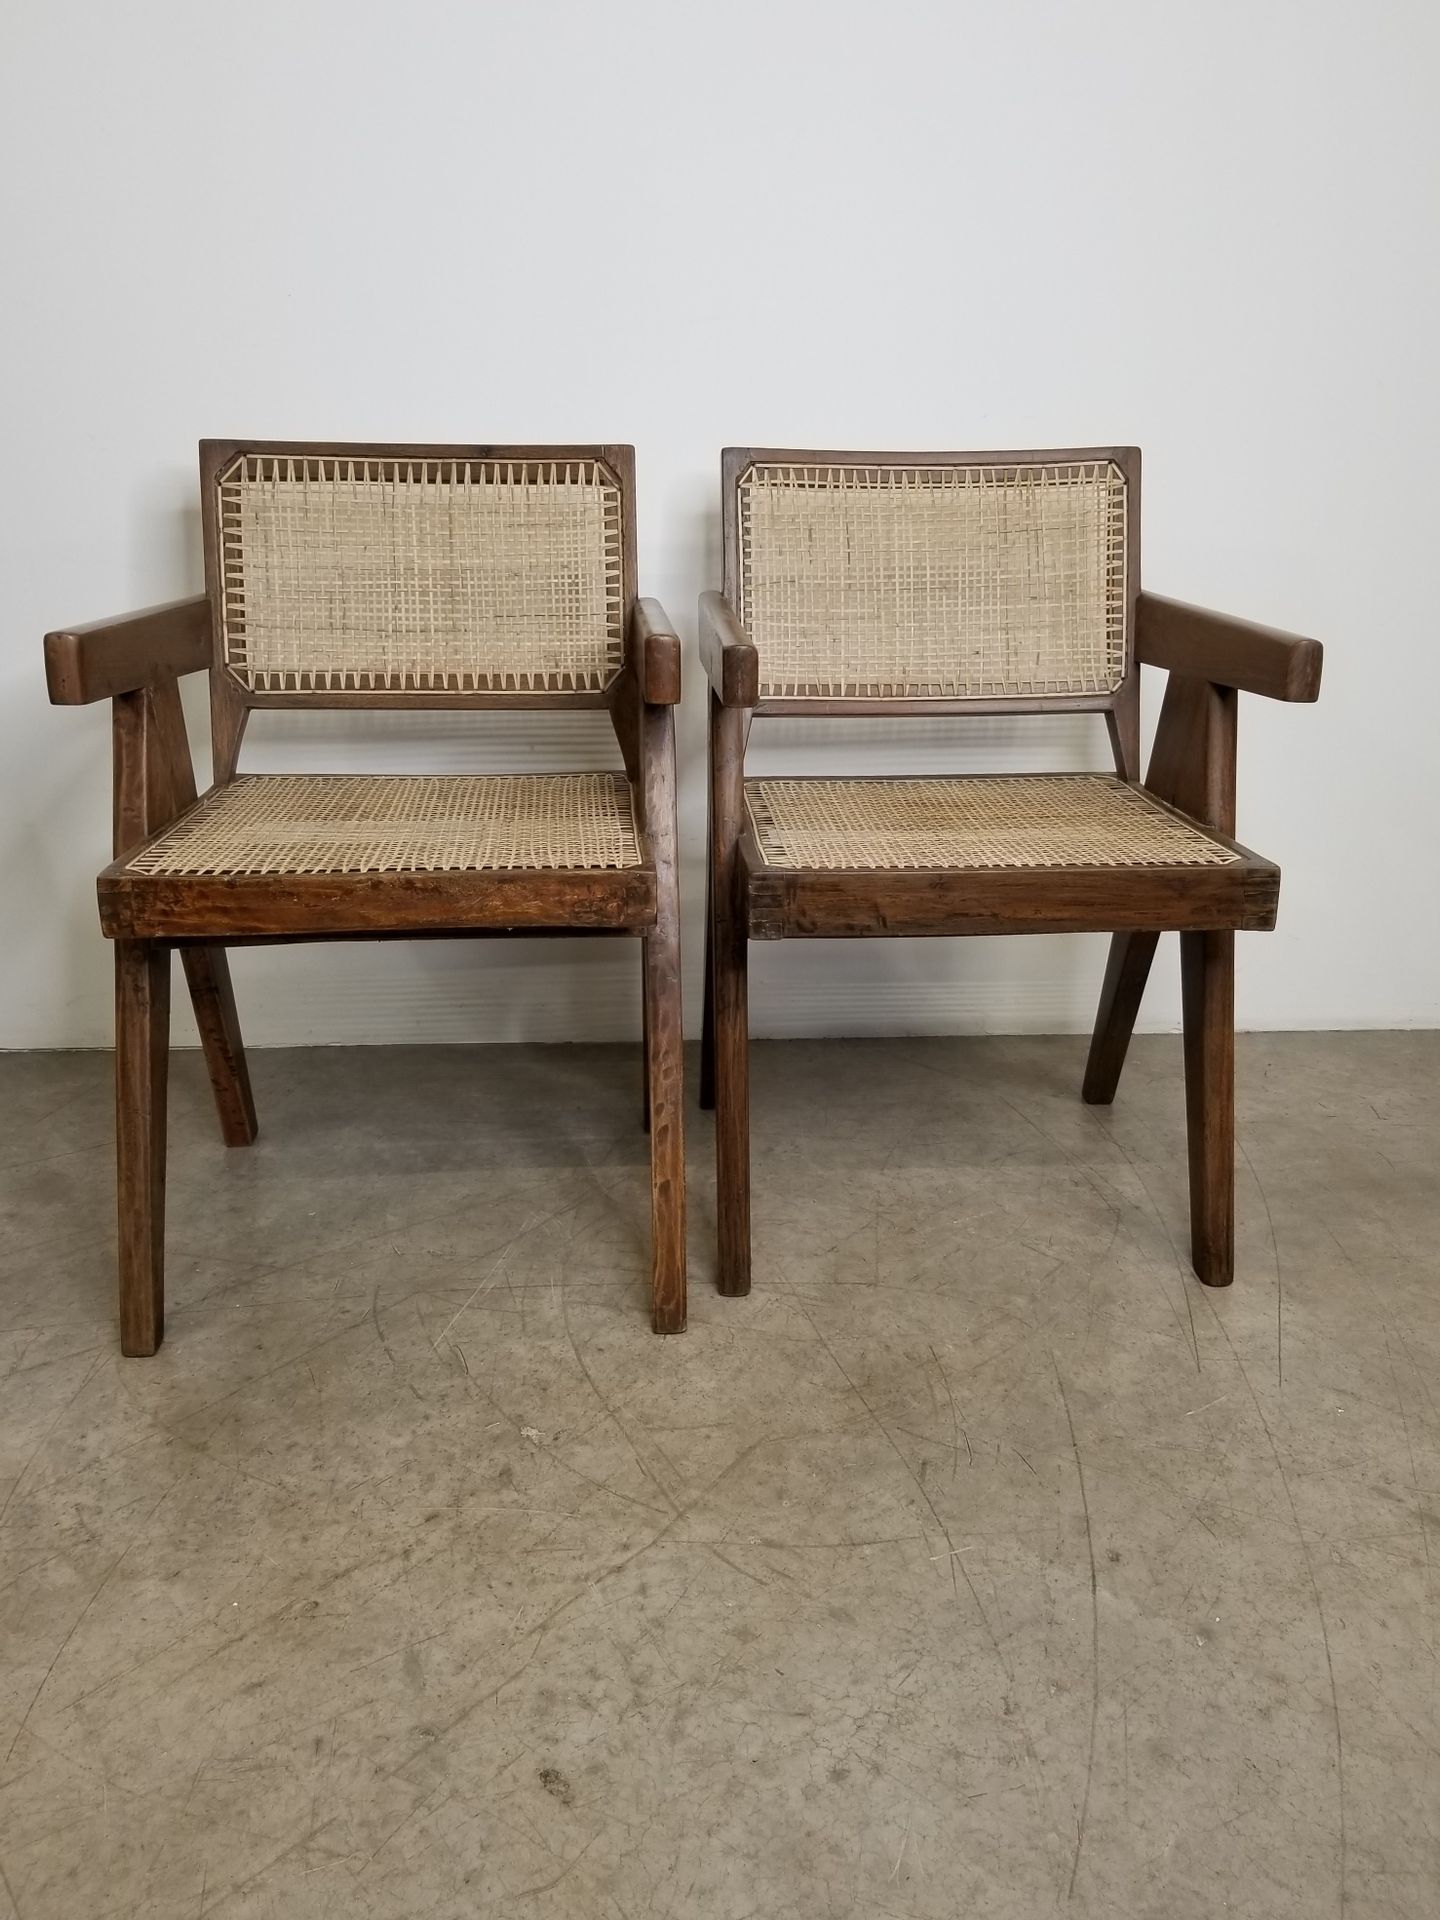 Null Pierre JEANNERET (1896-1967)

Pair of office chairs called "Office cane cha&hellip;